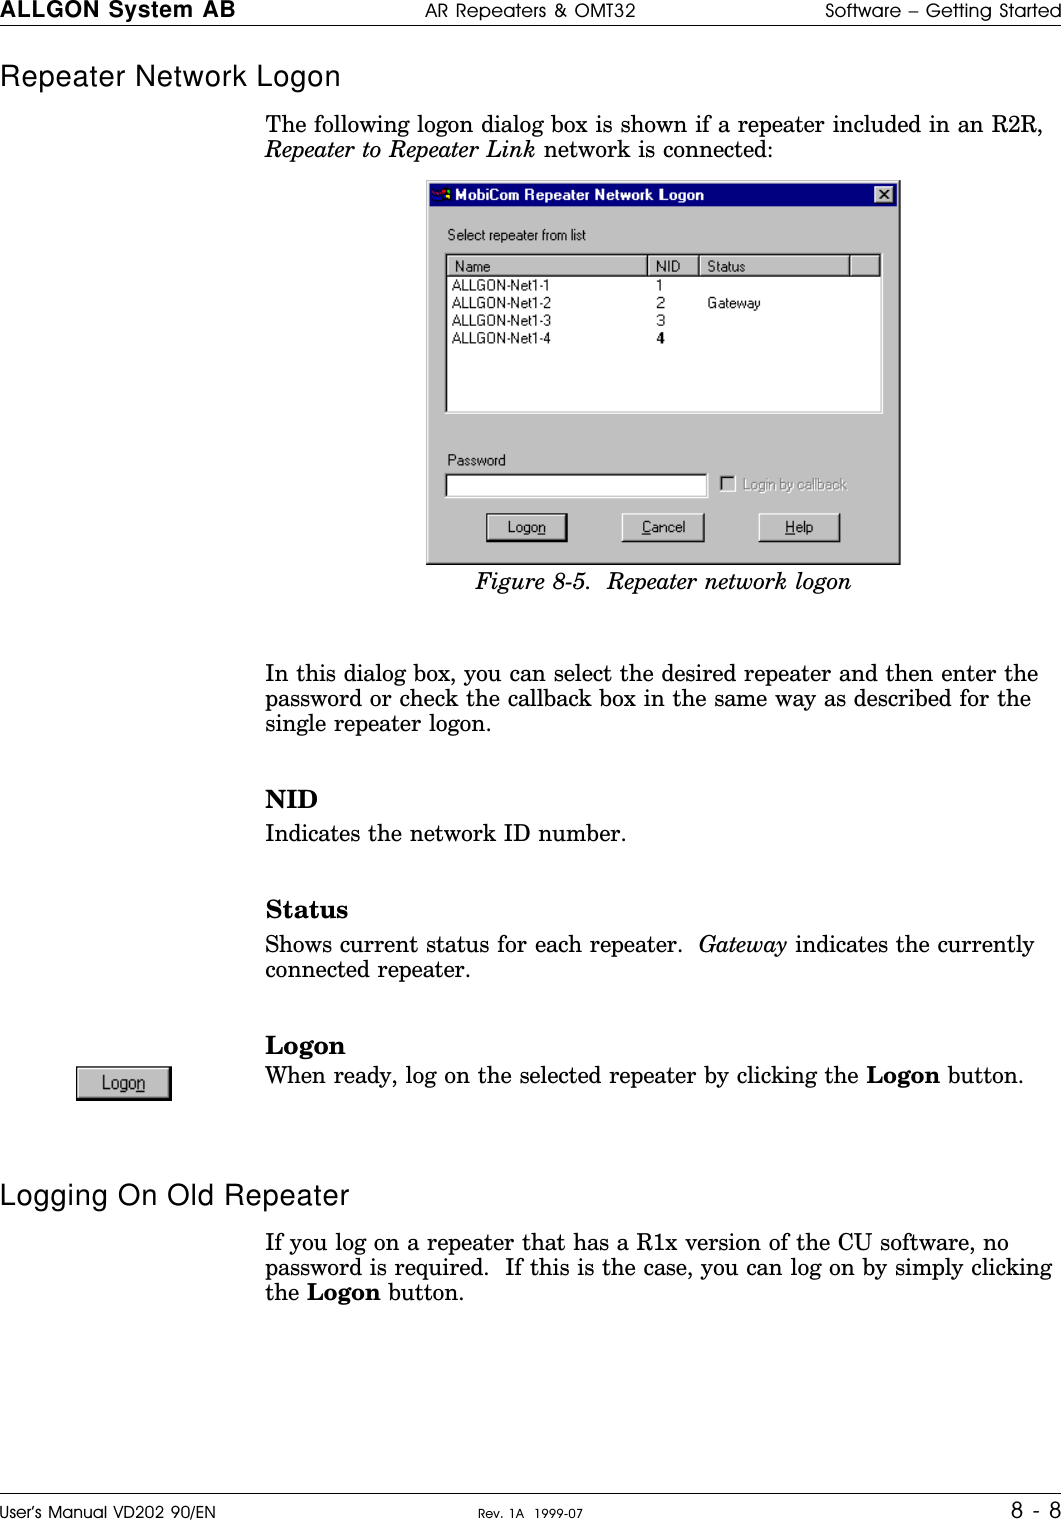 Repeater Network Logon The following logon dialog box is shown if a repeater included in an R2R,Repeater to Repeater Link network is connected:In this dialog box, you can select the desired repeater and then enter thepassword or check the callback box in the same way as described for thesingle repeater logon.NIDIndicates the network ID number.StatusShows current status for each repeater.  Gateway indicates the currentlyconnected repeater.LogonWhen ready, log on the selected repeater by clicking the Logon button.Logging On Old RepeaterIf you log on a repeater that has a R1x version of the CU software, nopassword is required.  If this is the case, you can log on by simply clickingthe Logon button.Figure 8-5.  Repeater network logonALLGON System AB AR Repeaters &amp; OMT32 Software – Getting StartedUser’s Manual VD202 90/EN Rev. 1A  1999-07 8 - 8